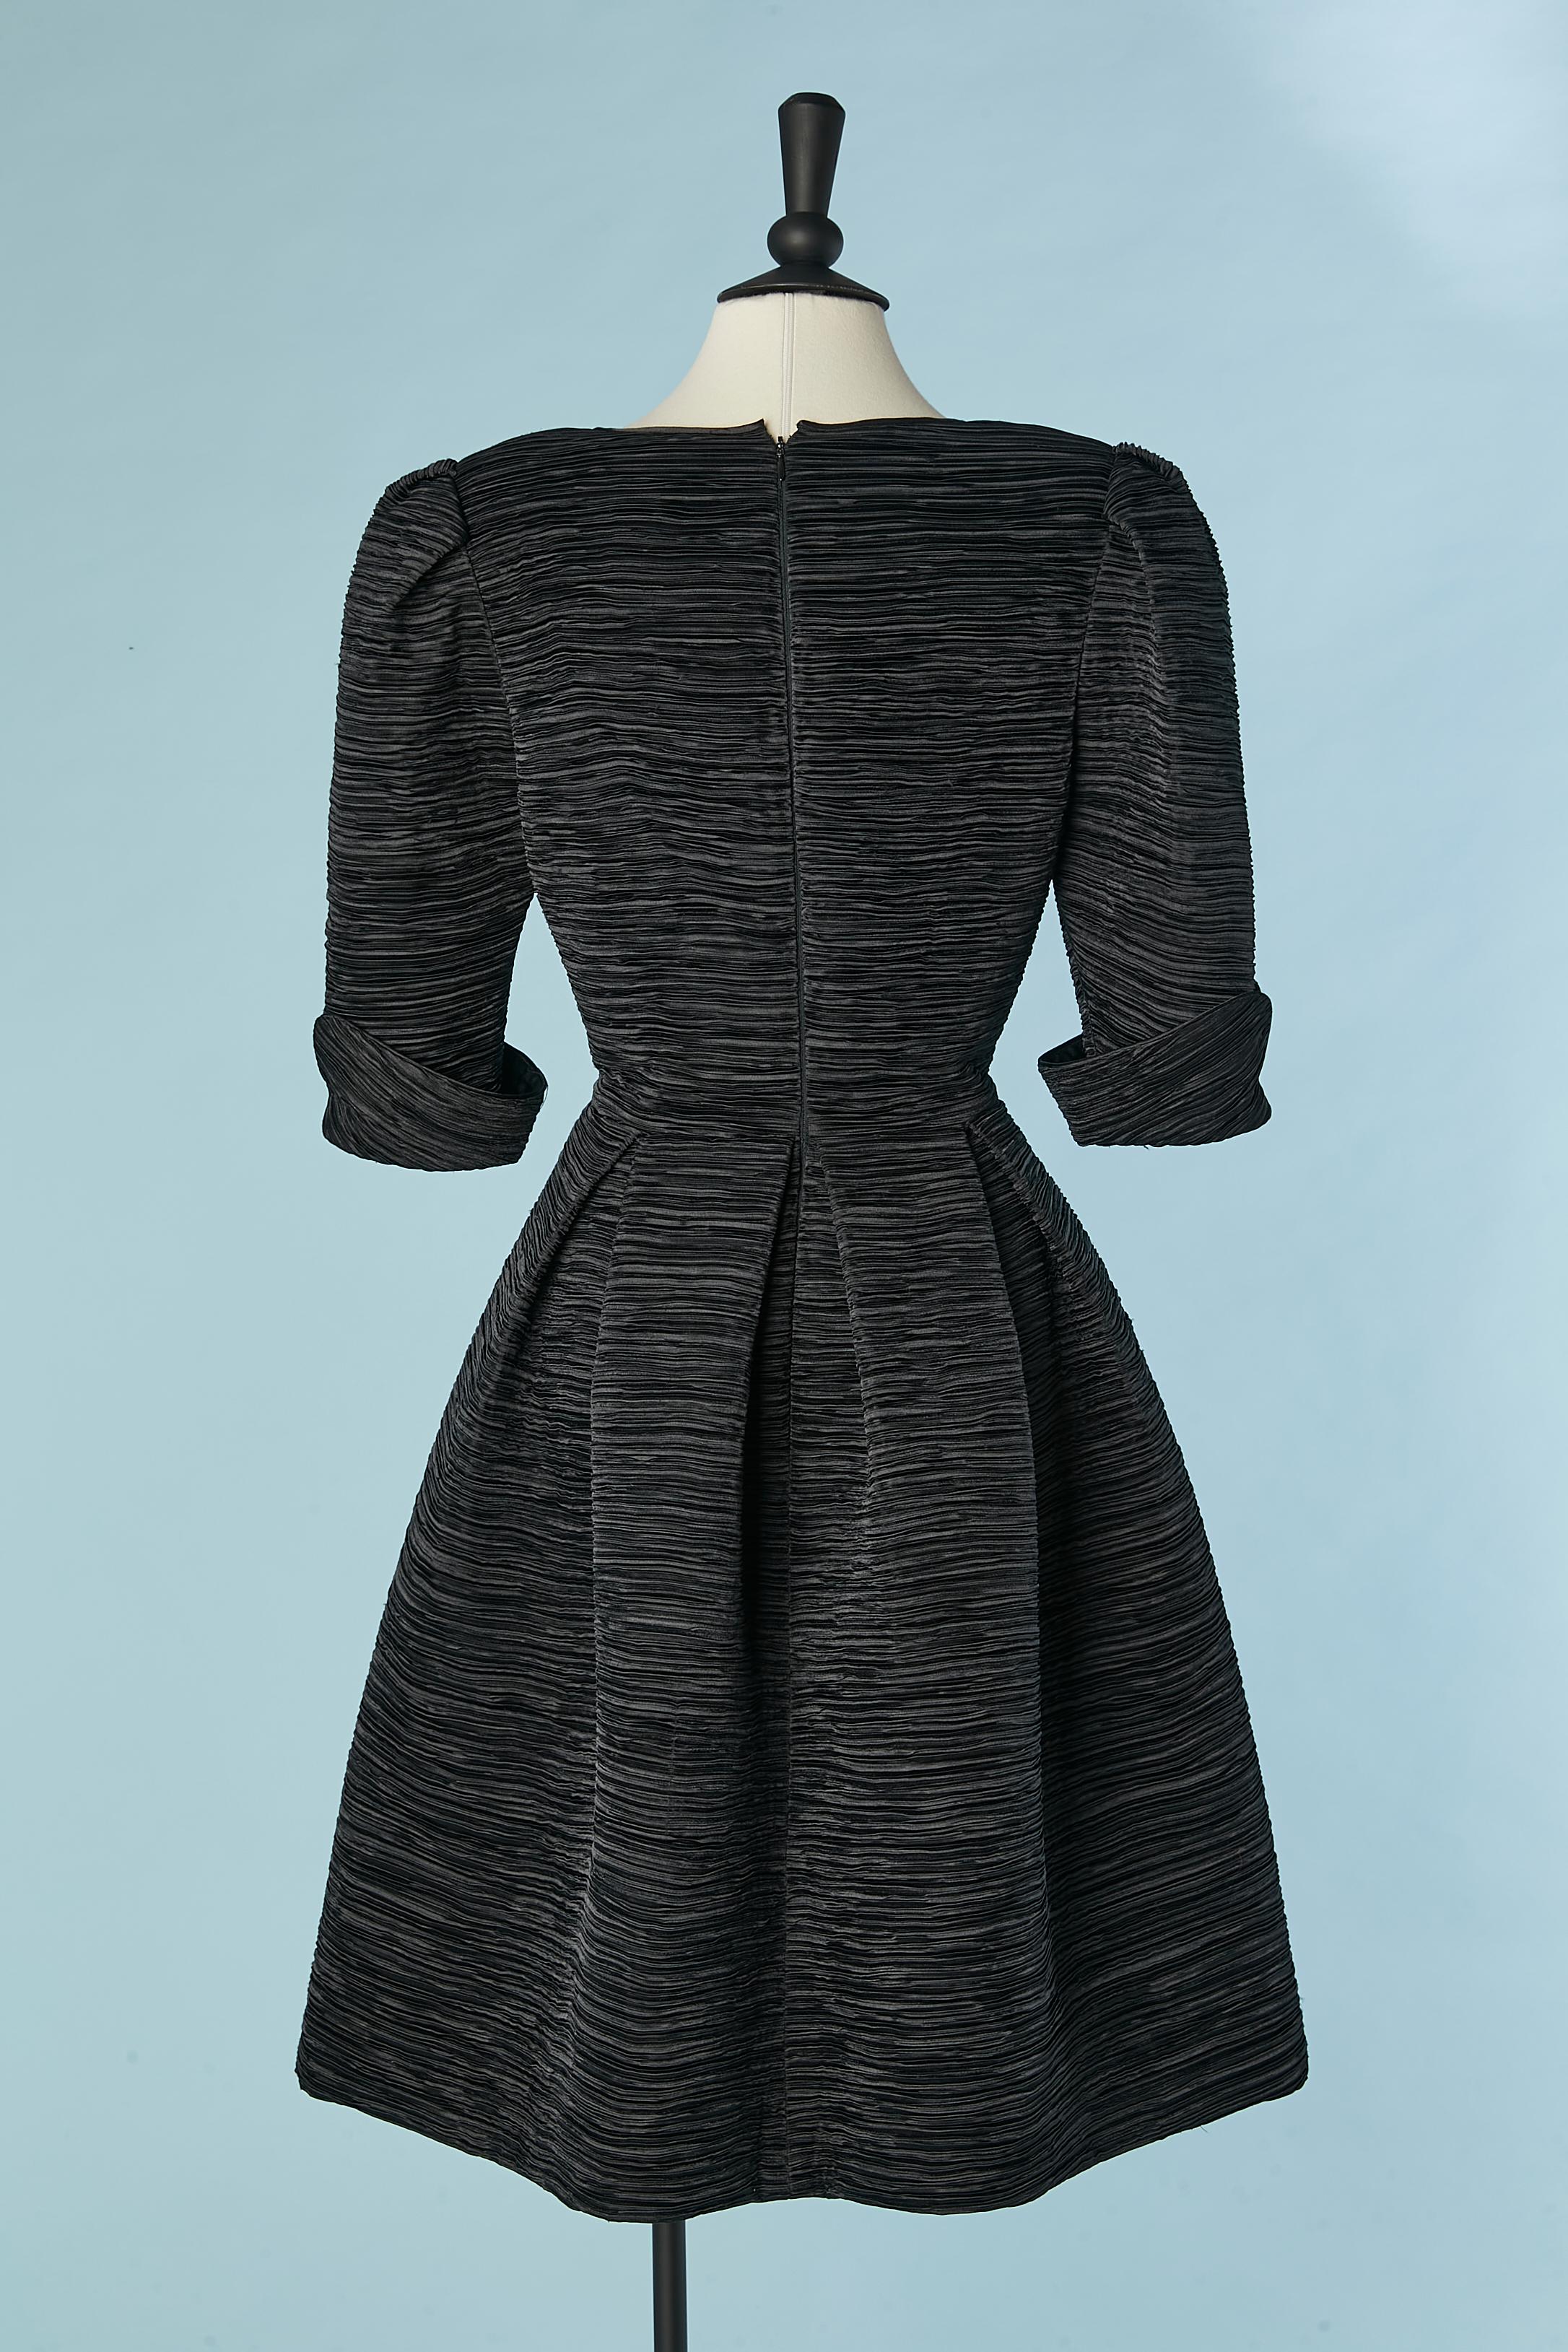 Black cocktail dress in Fortuny pleated fabric  Pierre Labiche Circa 1980's  For Sale 3